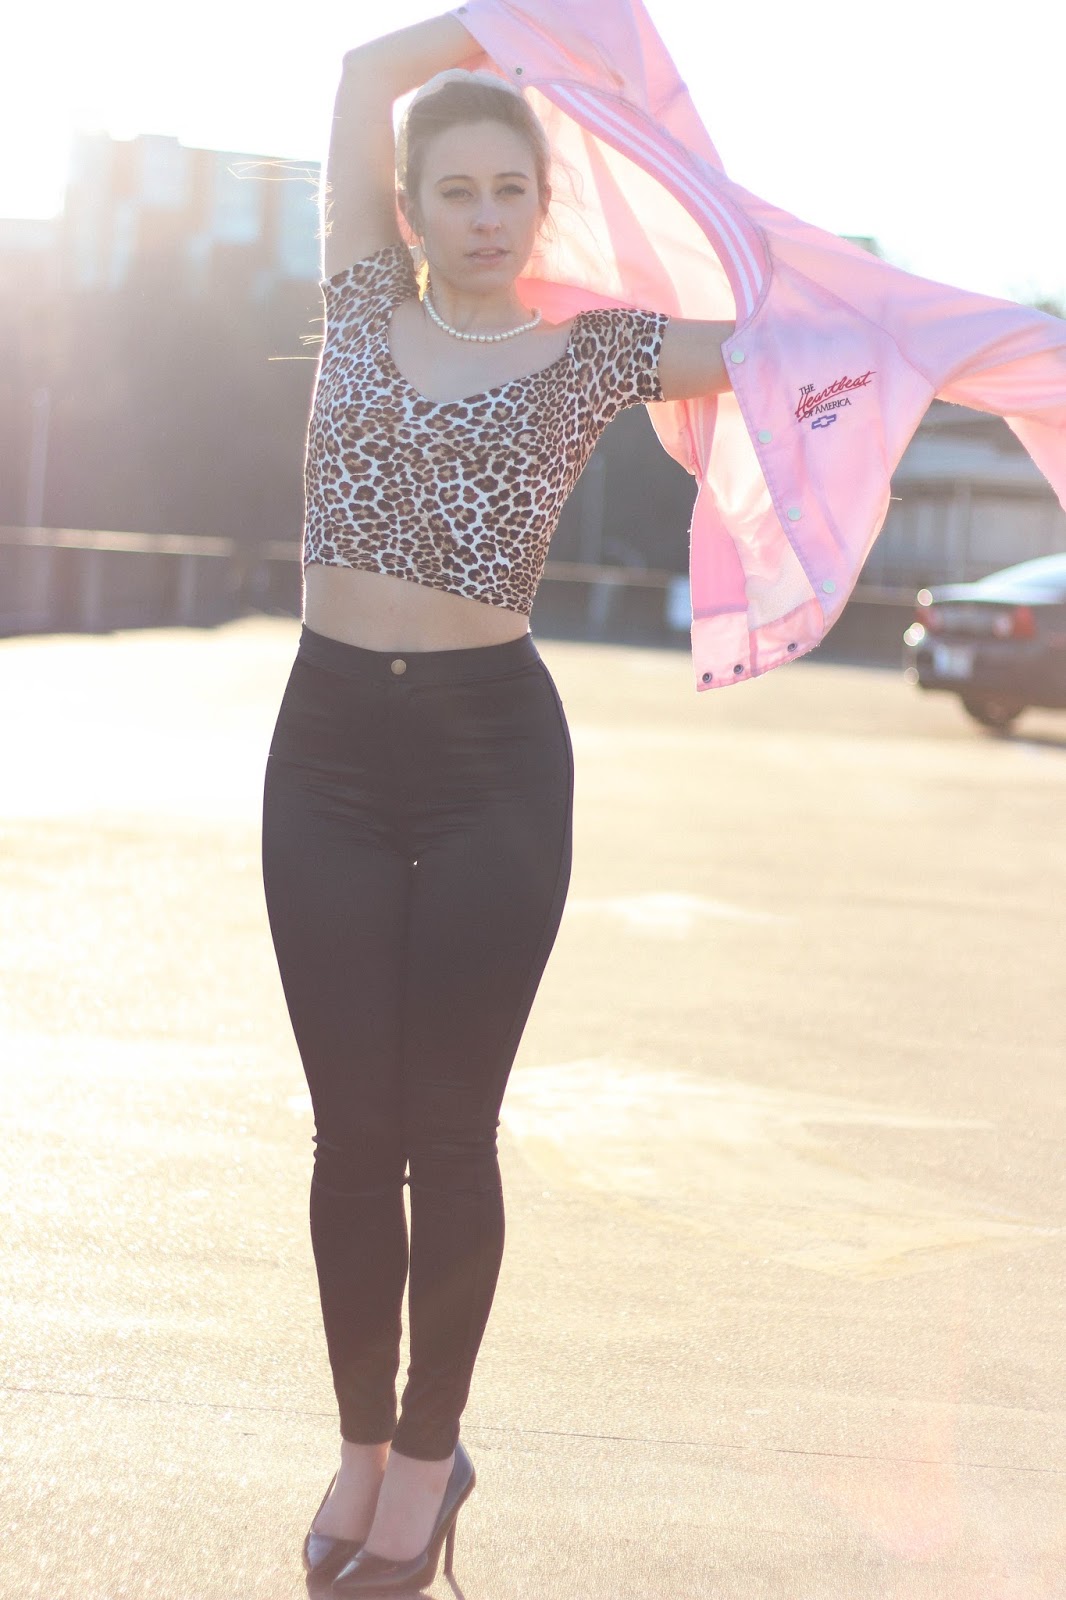 50's, Retro, Outfit, Pink Ladies, Disco Pants, Classy, Fashion Blogger, Personal Style, High Waist Pants, Rockabilly, Film, Movies, Vintage, Grease, Girly, Femme Fatale, Bardot Top, Cheetah Print, Crop Top, Asos, Forever 21